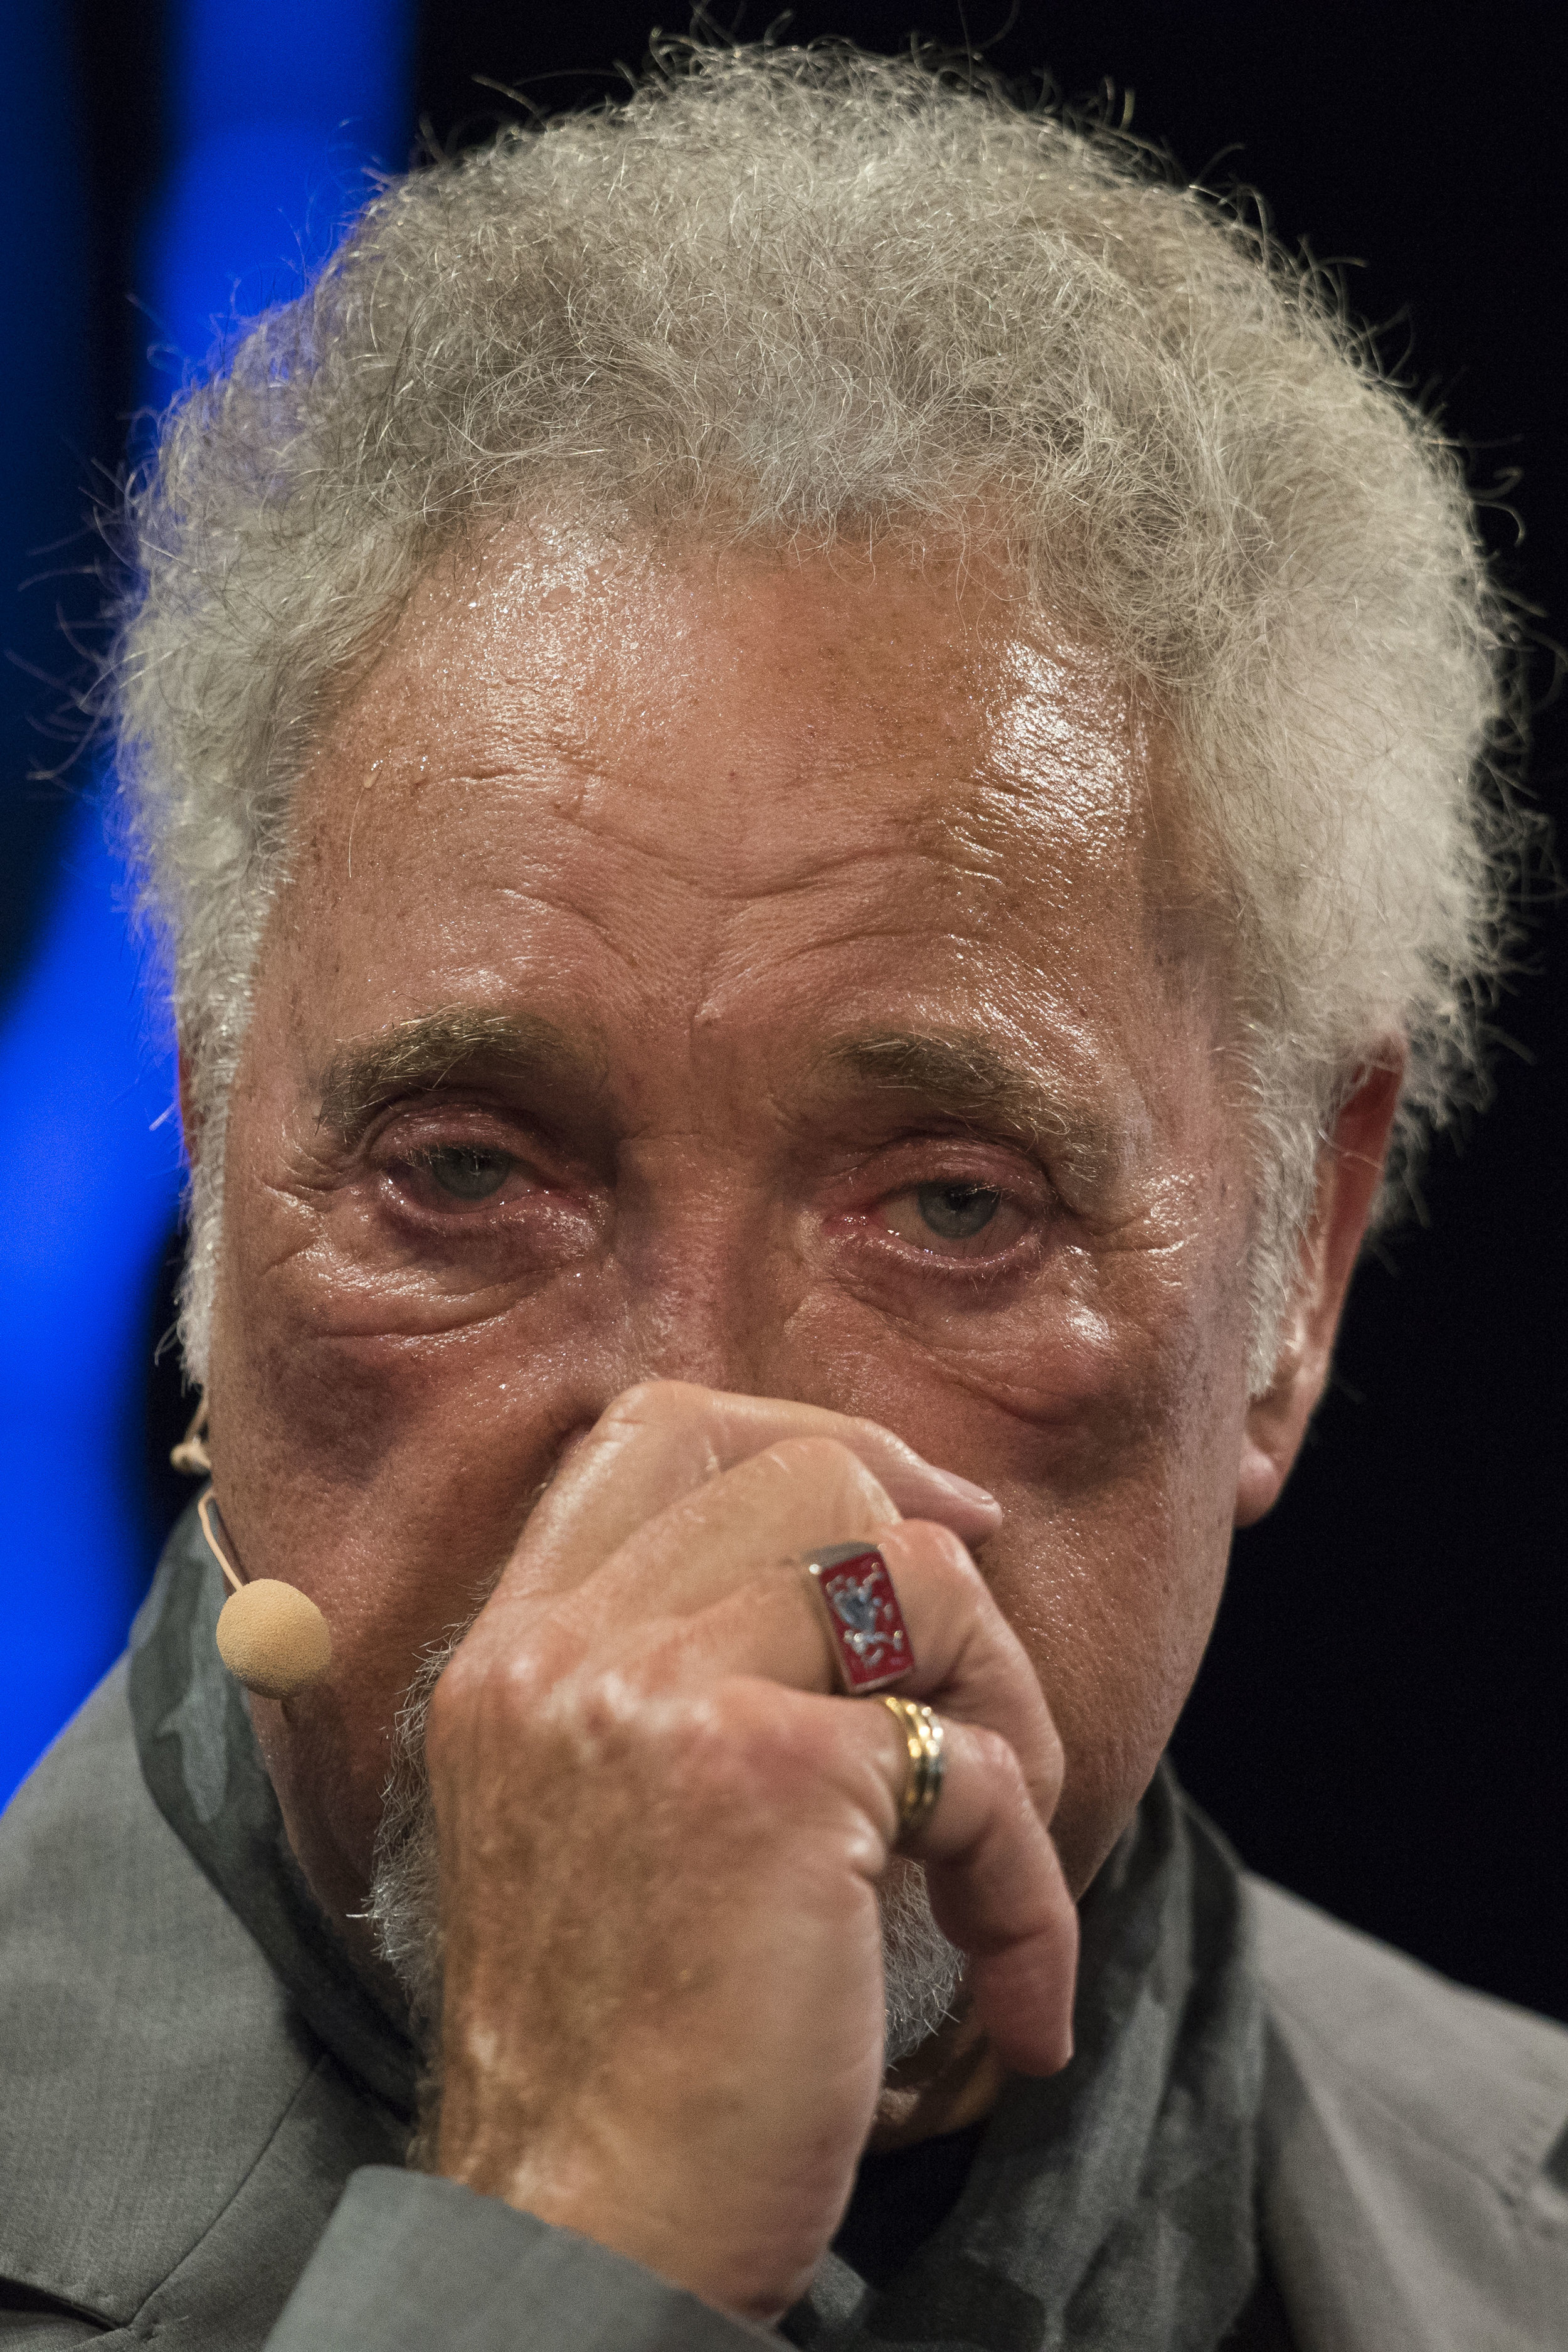  HAY-ON-WYE, WALES - JUNE 05:

Sir Tom Jones speaks during the 2016 Hay Festival on June 5, 2016 in Hay-on-Wye, Wales. This is the Welsh singer�s first public appearance since the death of his wife Lady Melinda Rose Woodward who died on April 10, 201